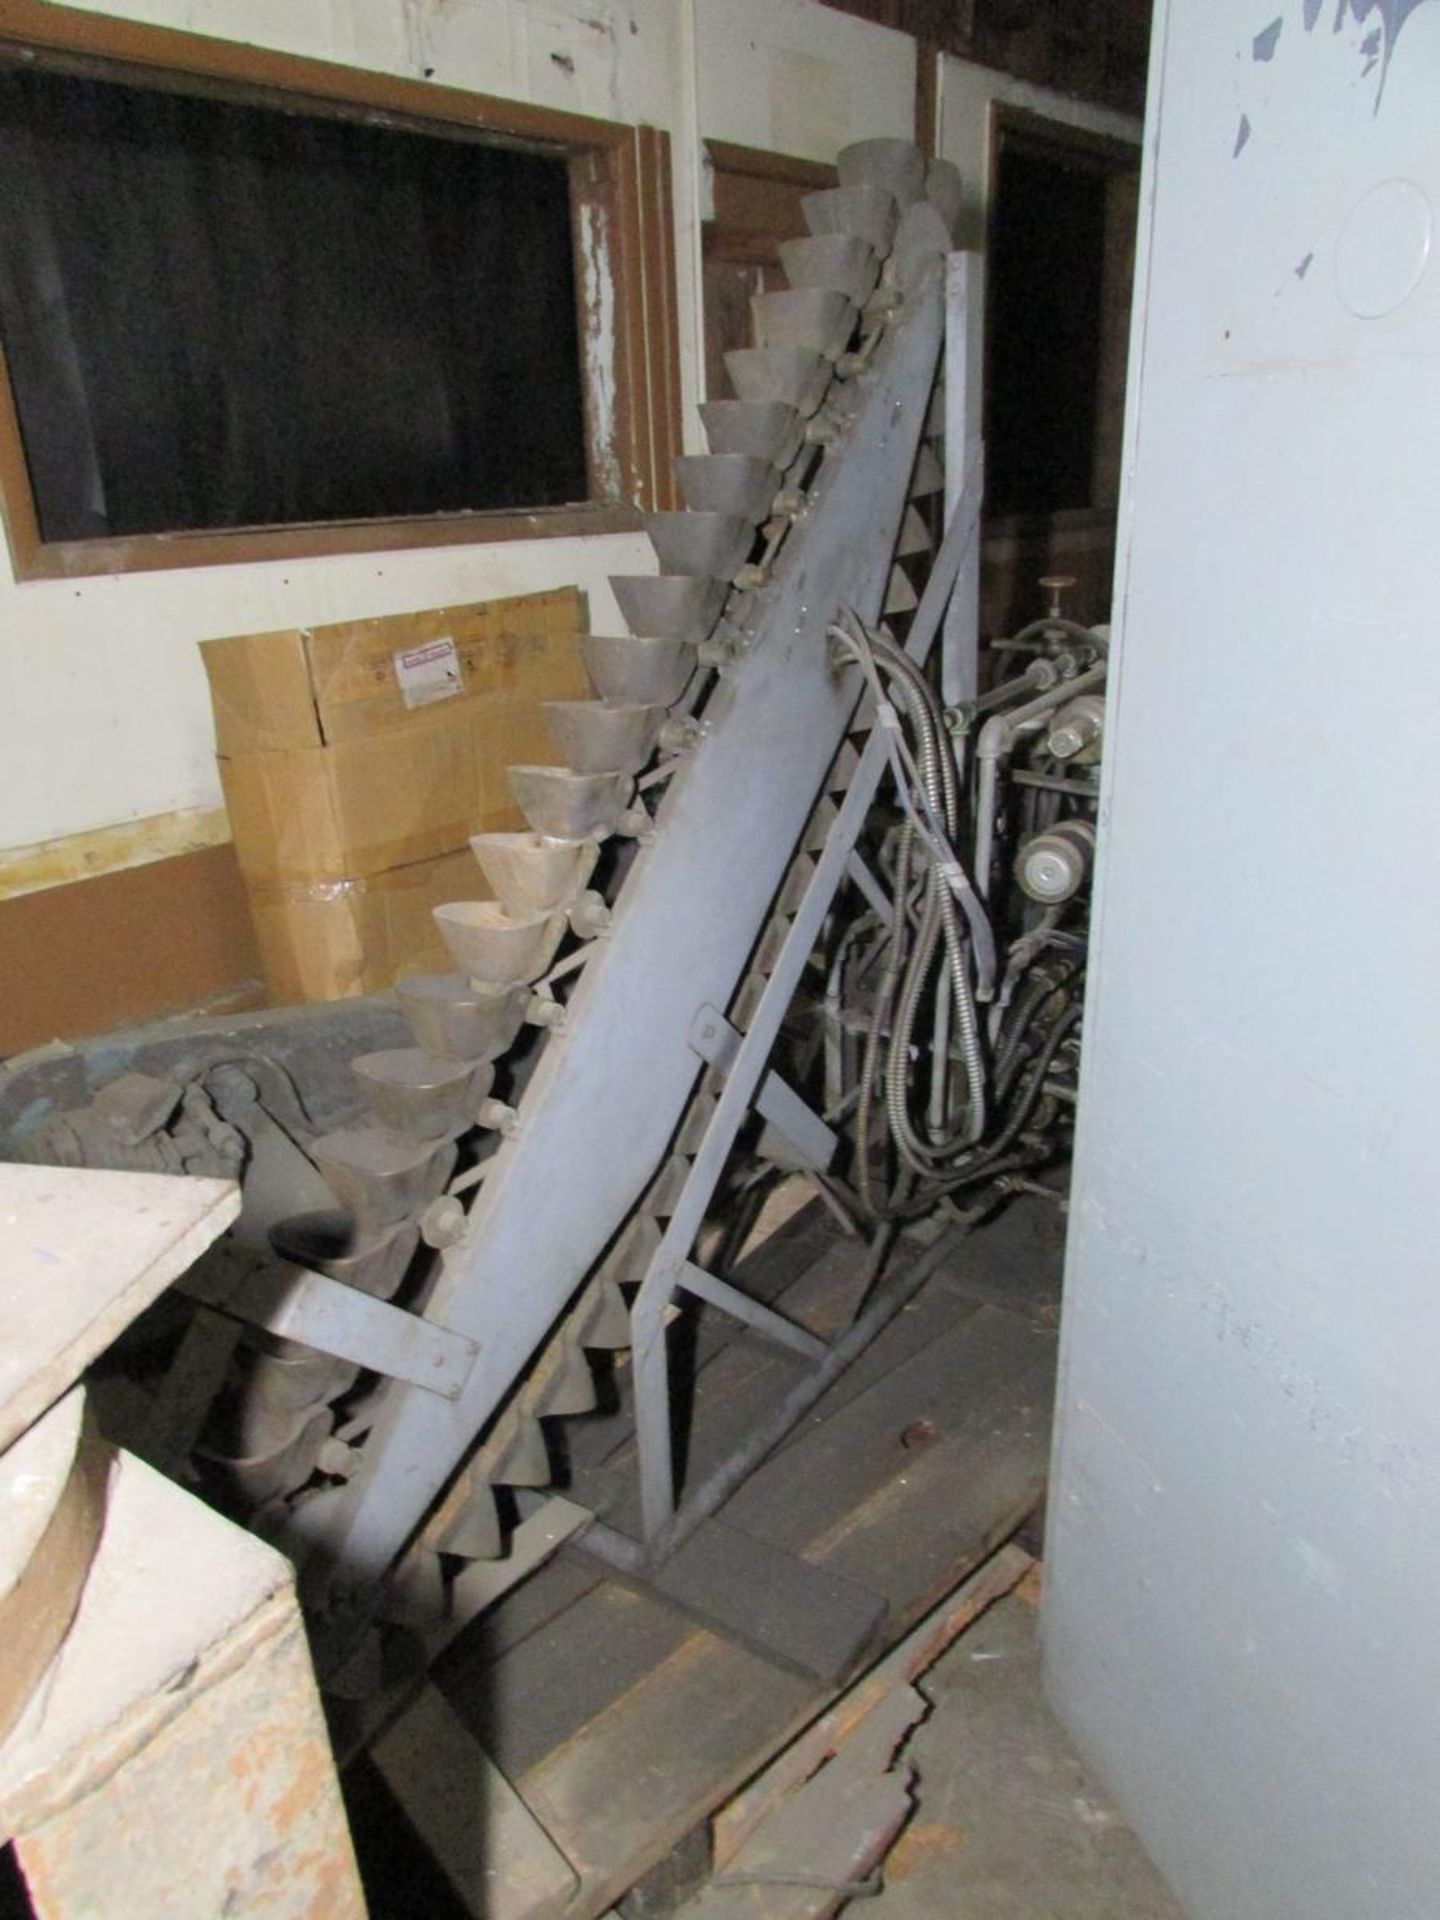 Remaining Contents of Storage Room - Image 12 of 27